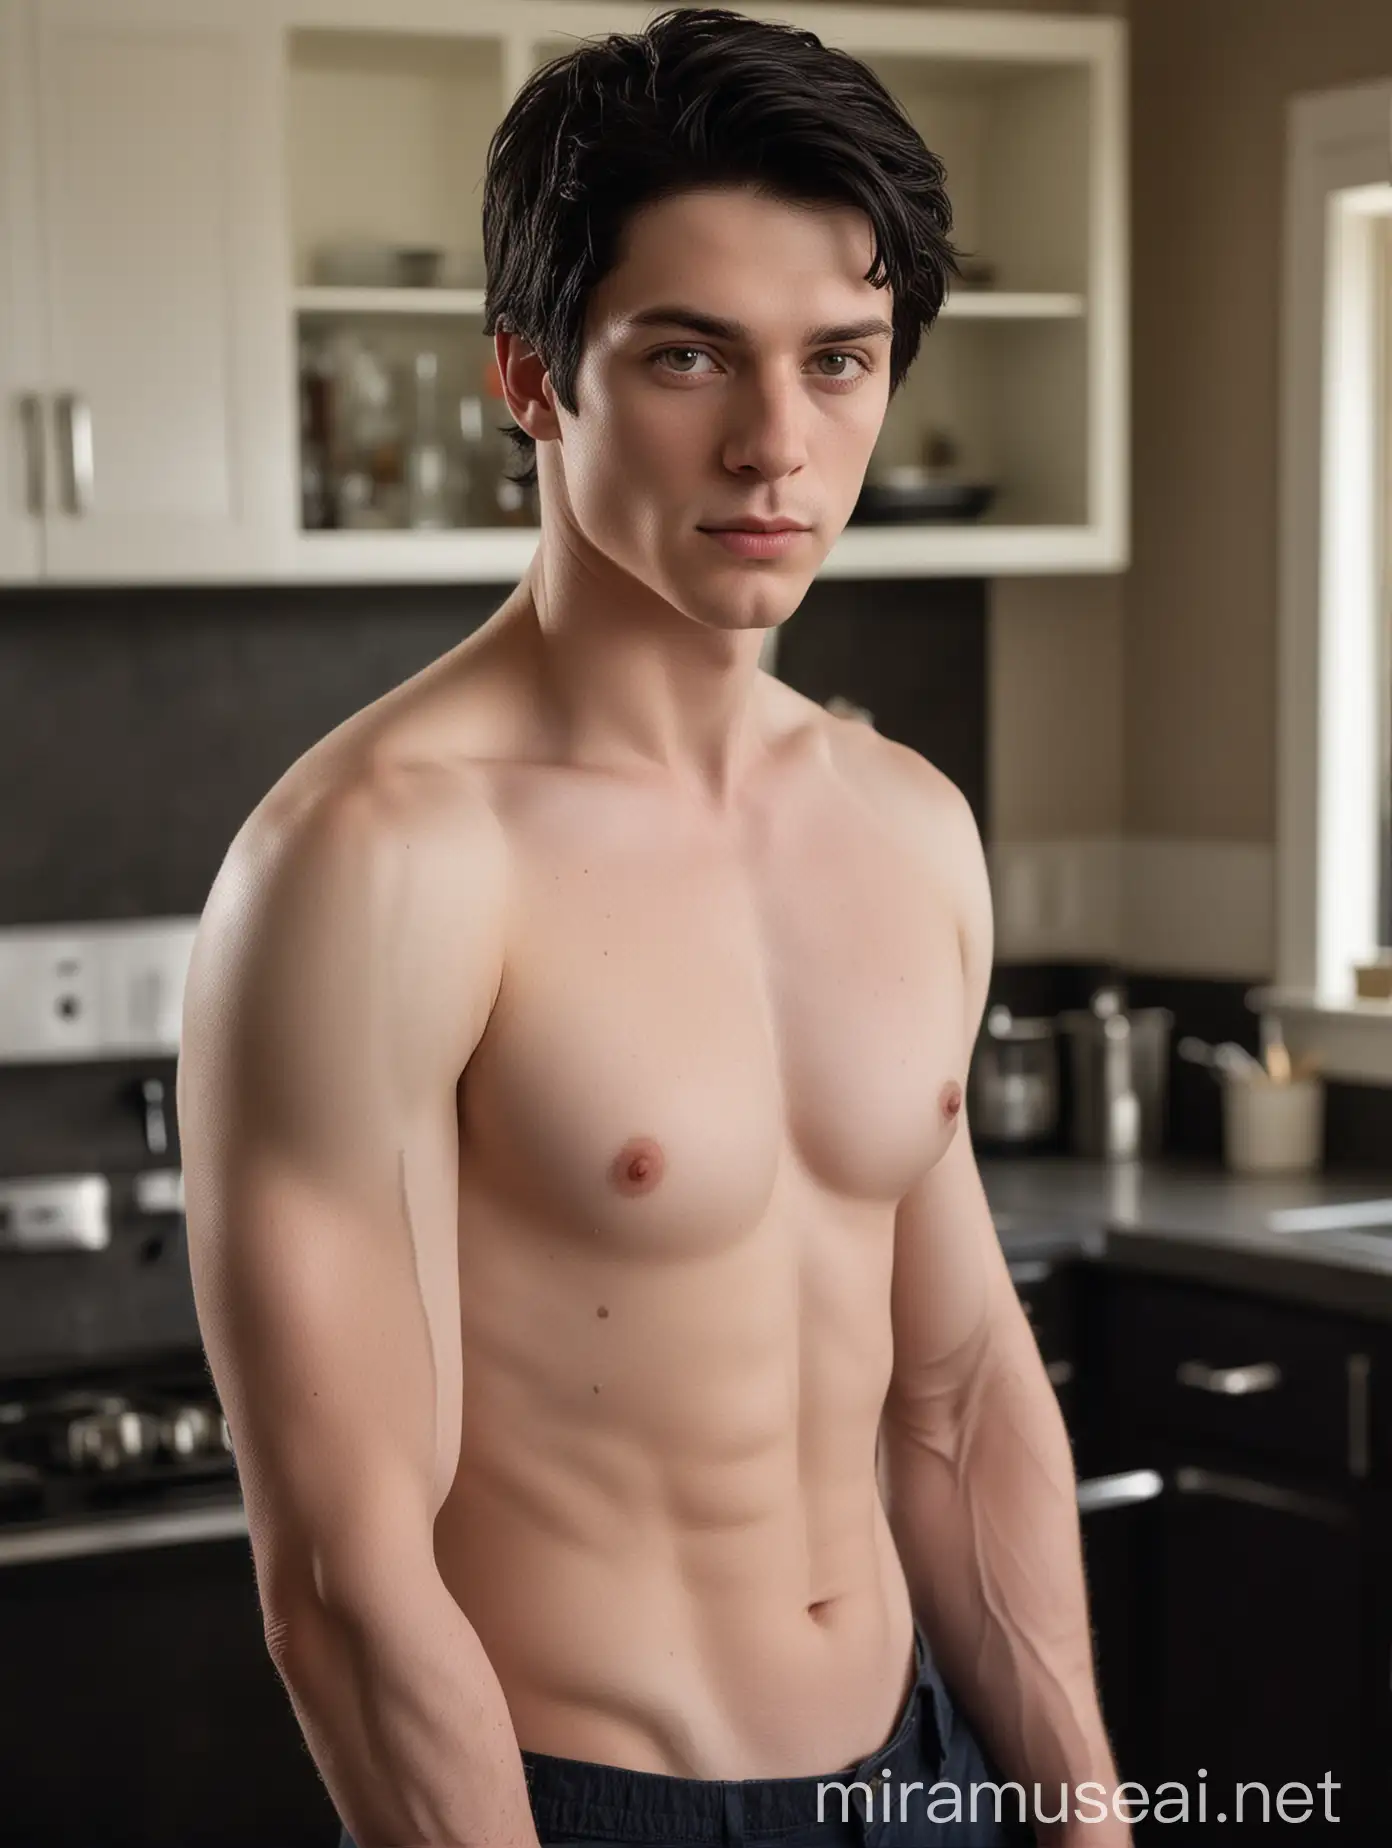 The subject of the portrait is a man with white, pale skin and a flawless physique and athletic body. He’s topless and have short regulation-cut black hair. The image should prominently highlight his brown eyes while ensuring the eye and hair color remain distinct. The background should be a beautiful and dark kitchen.